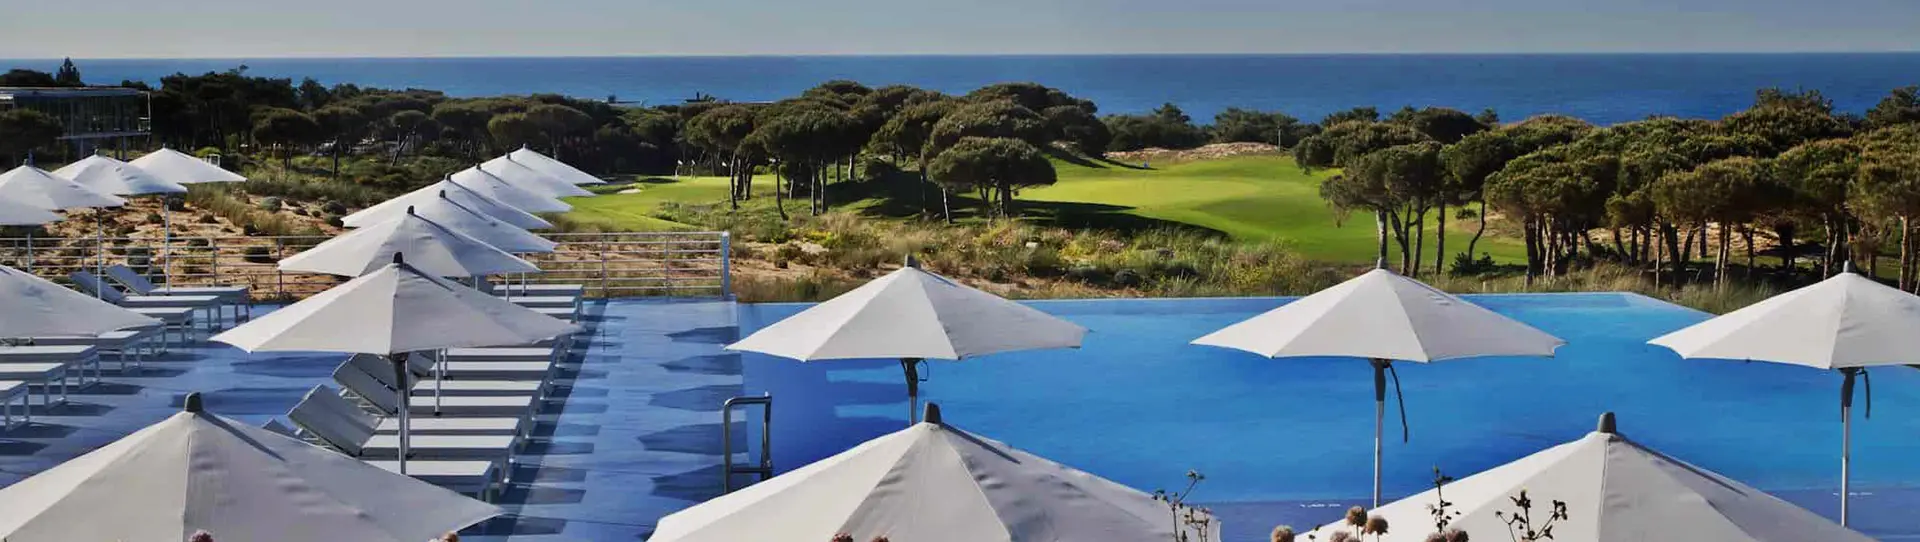 Portugal golf holidays - 3 Nights BB & 2 Golf Rounds<br><b>Dunes Experience</b> - Photo 2